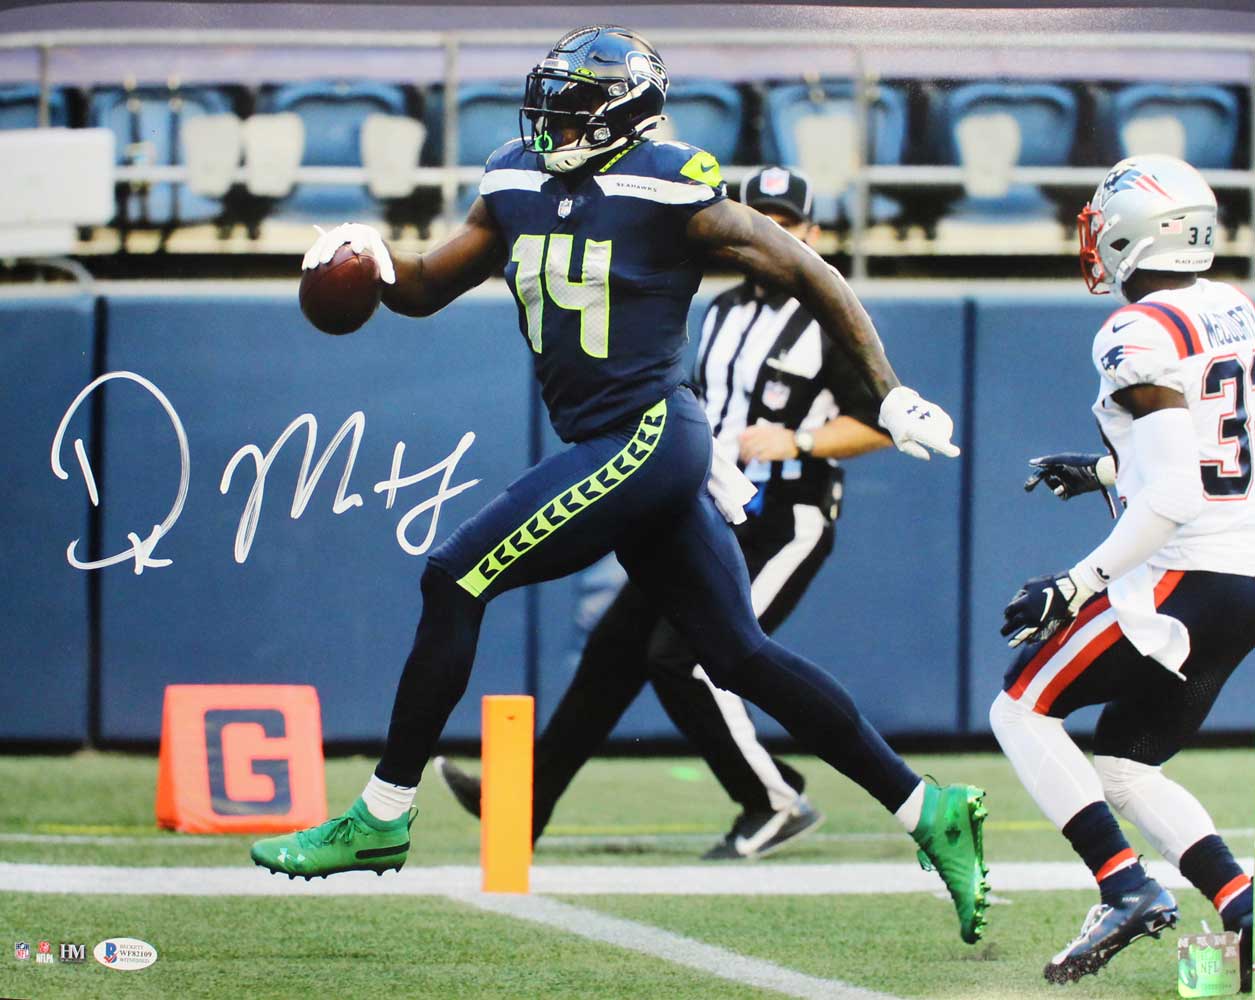 DK Metcalf Autographed/Signed Seattle Seahawks 16x20 Photo BAS 29546 HM